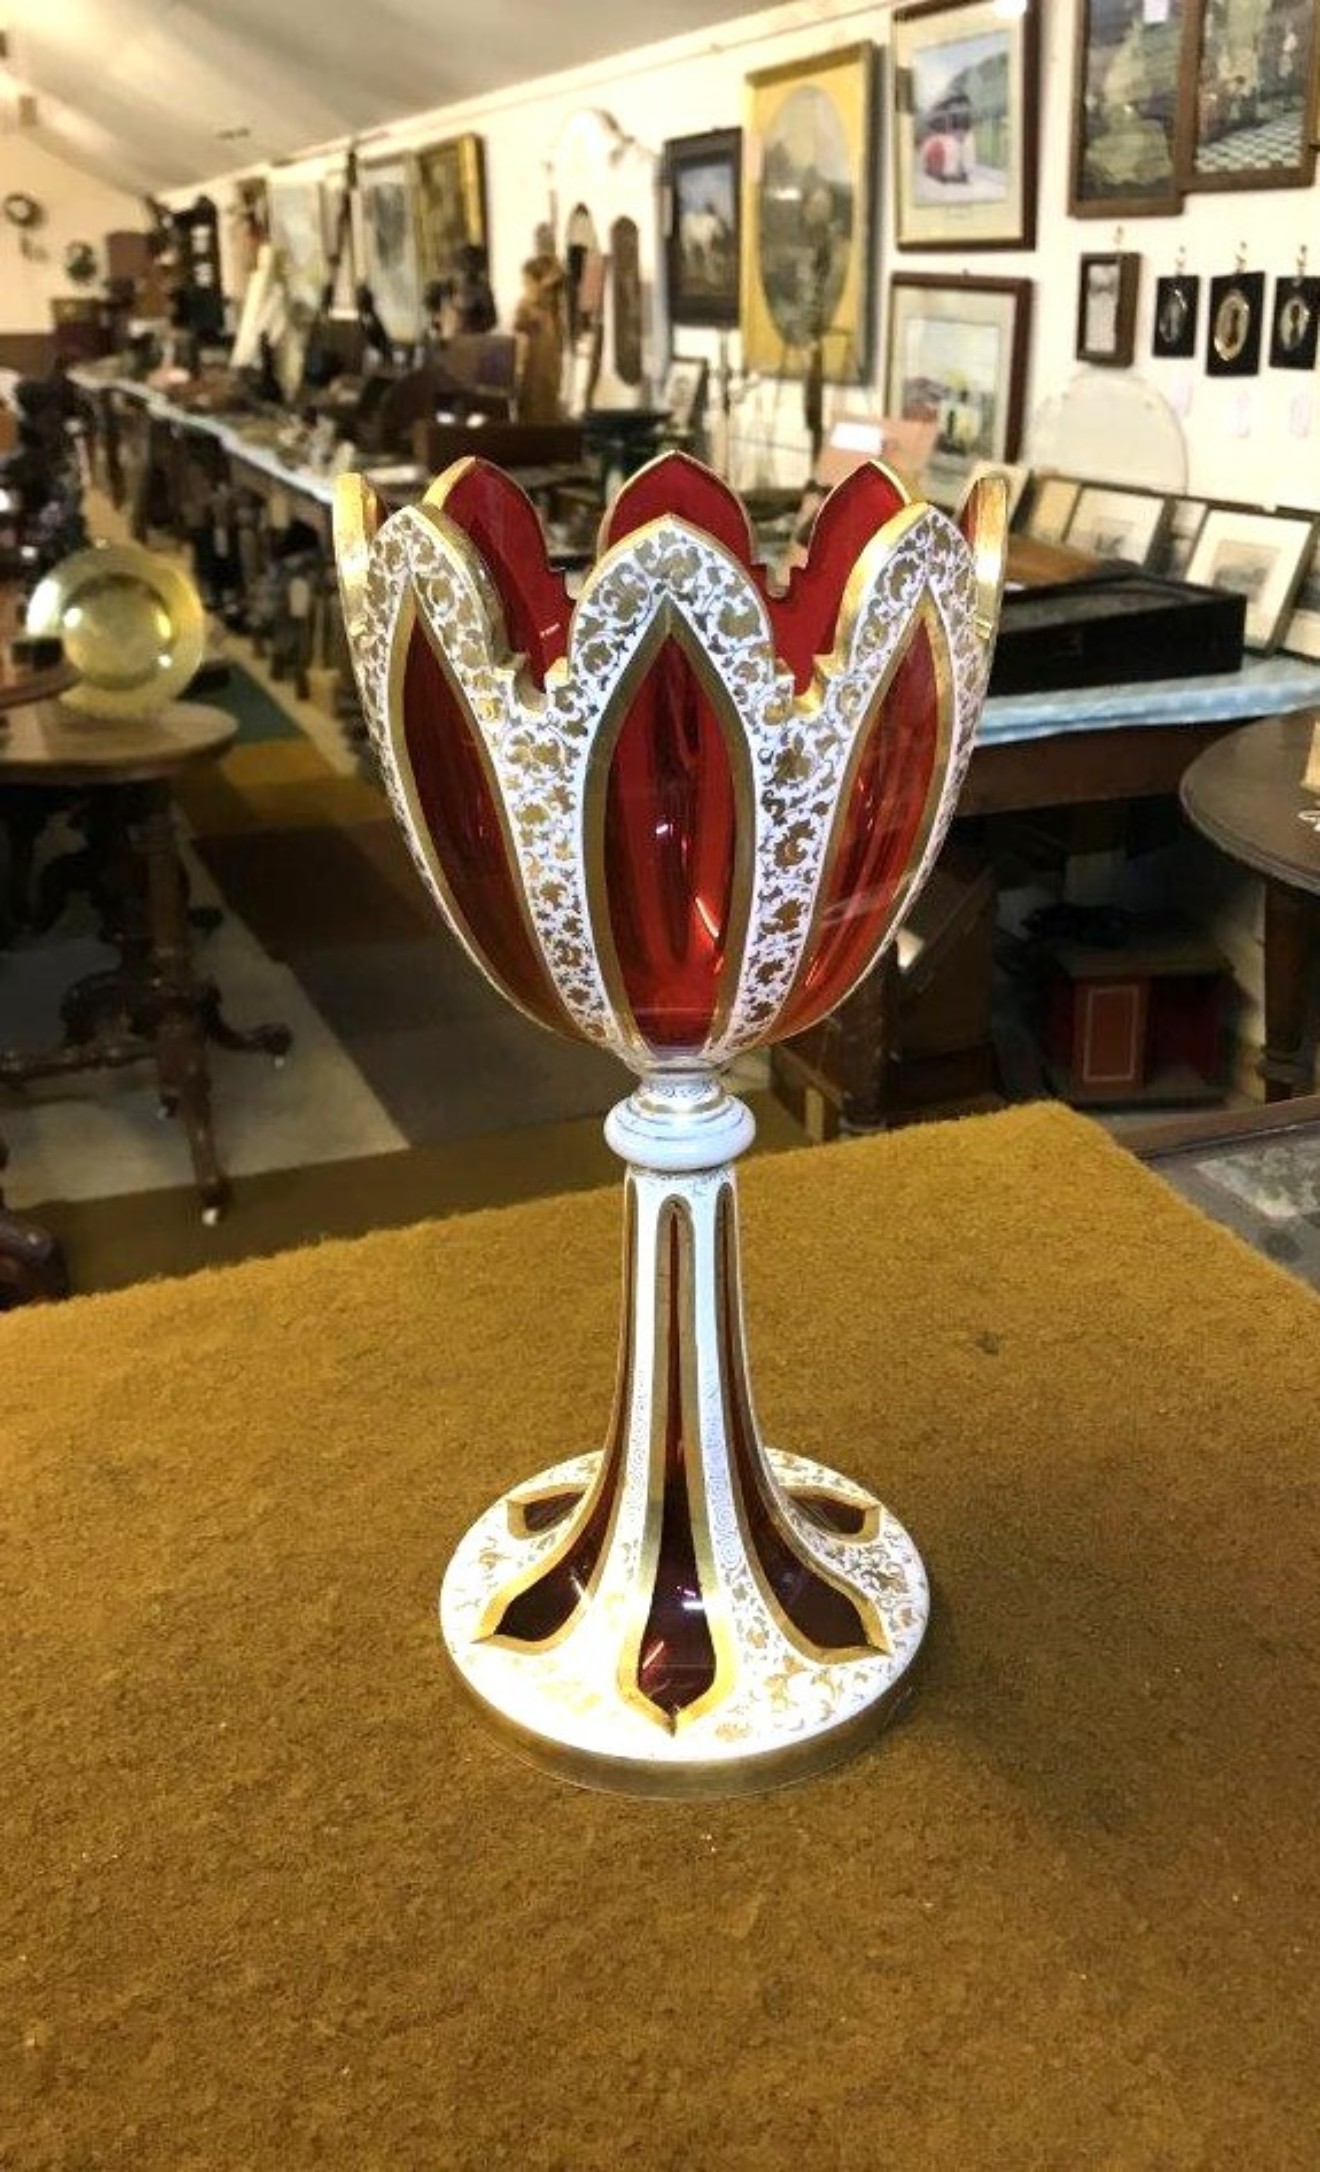 Antique Bohemian Overlaid Ruby Glass Vase / Table Centrepiece